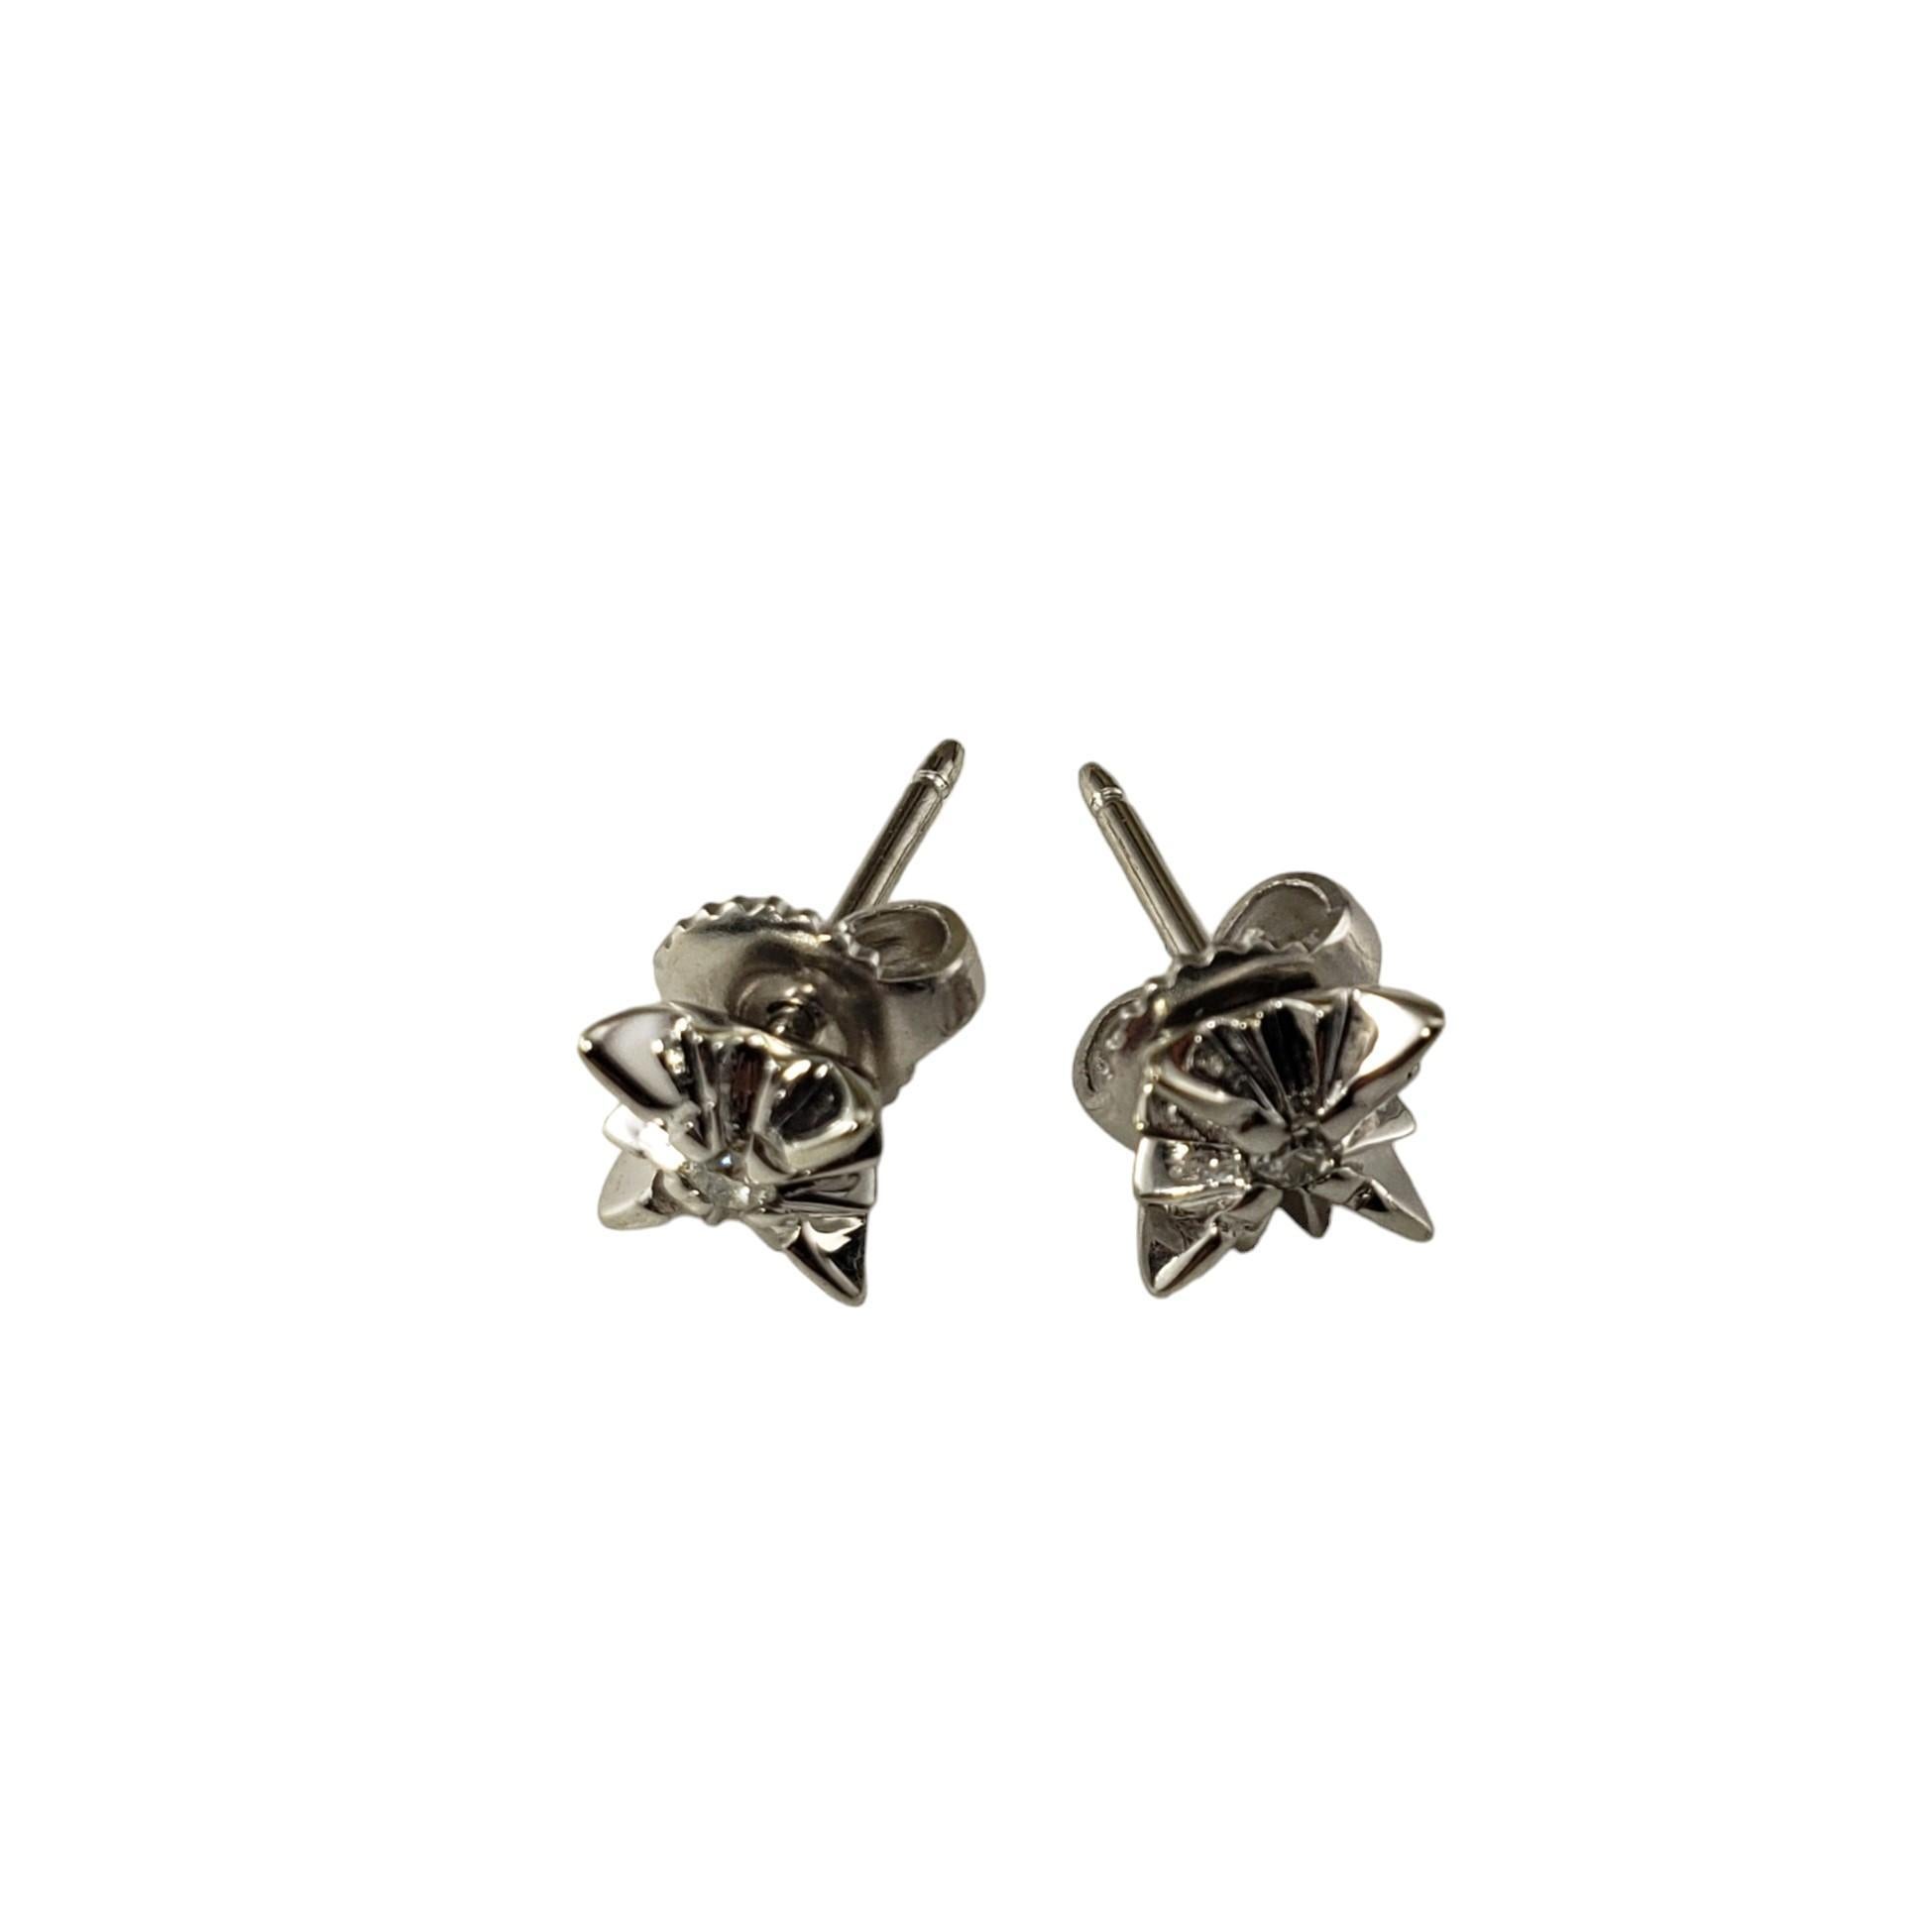 14 Karat White Gold and Diamond Stud Earrings-

These lovely earrings each feature one round brilliant cut diamond set in a starburst 14K white gold setting.  Push back closures.

Approximate total diamond weight: .04 ct.

Diamond color: